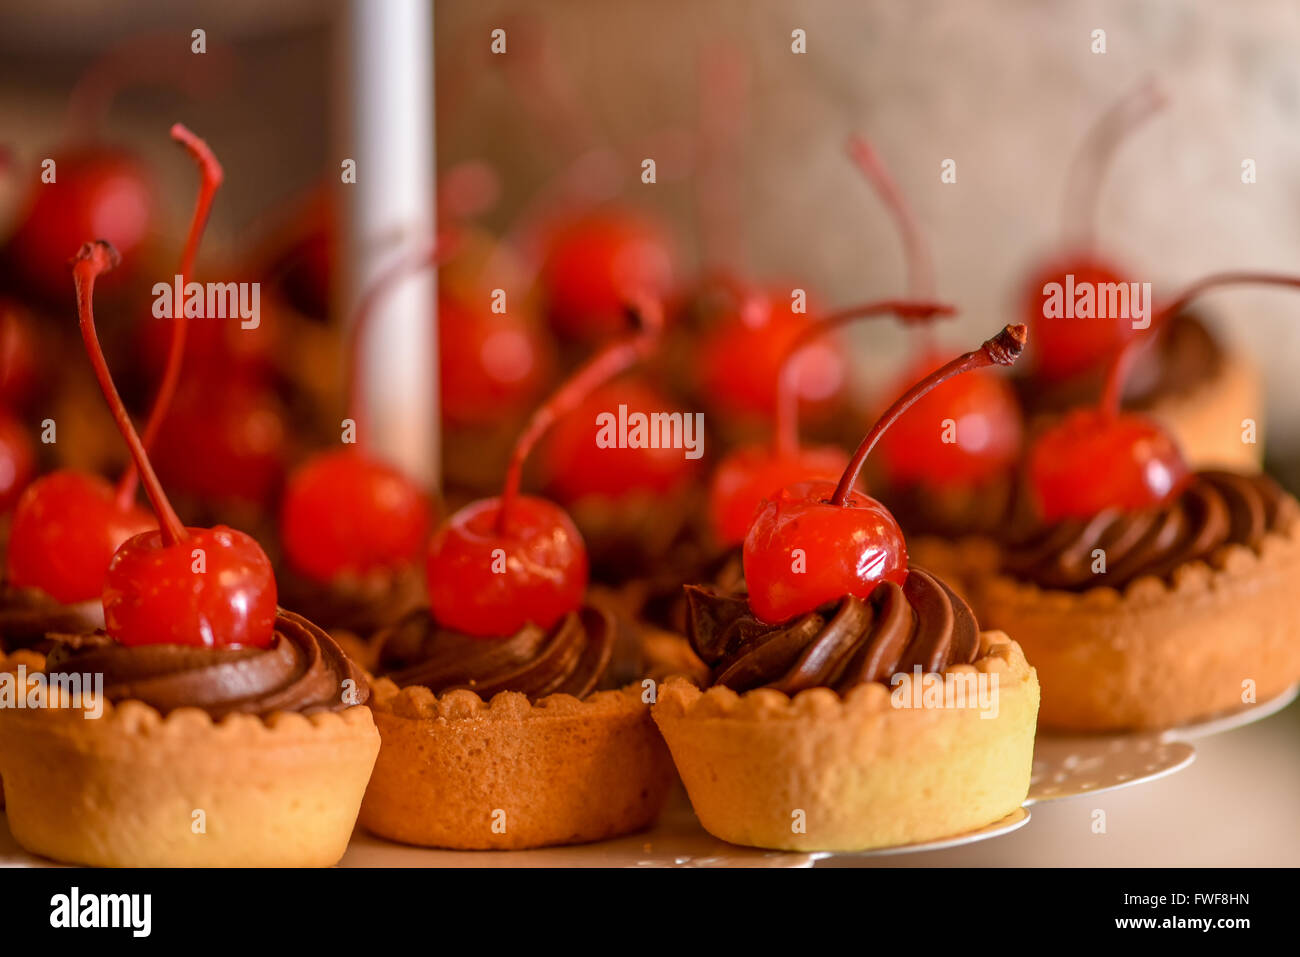 Chocolate cupcakes with cherry on top Stock Photo